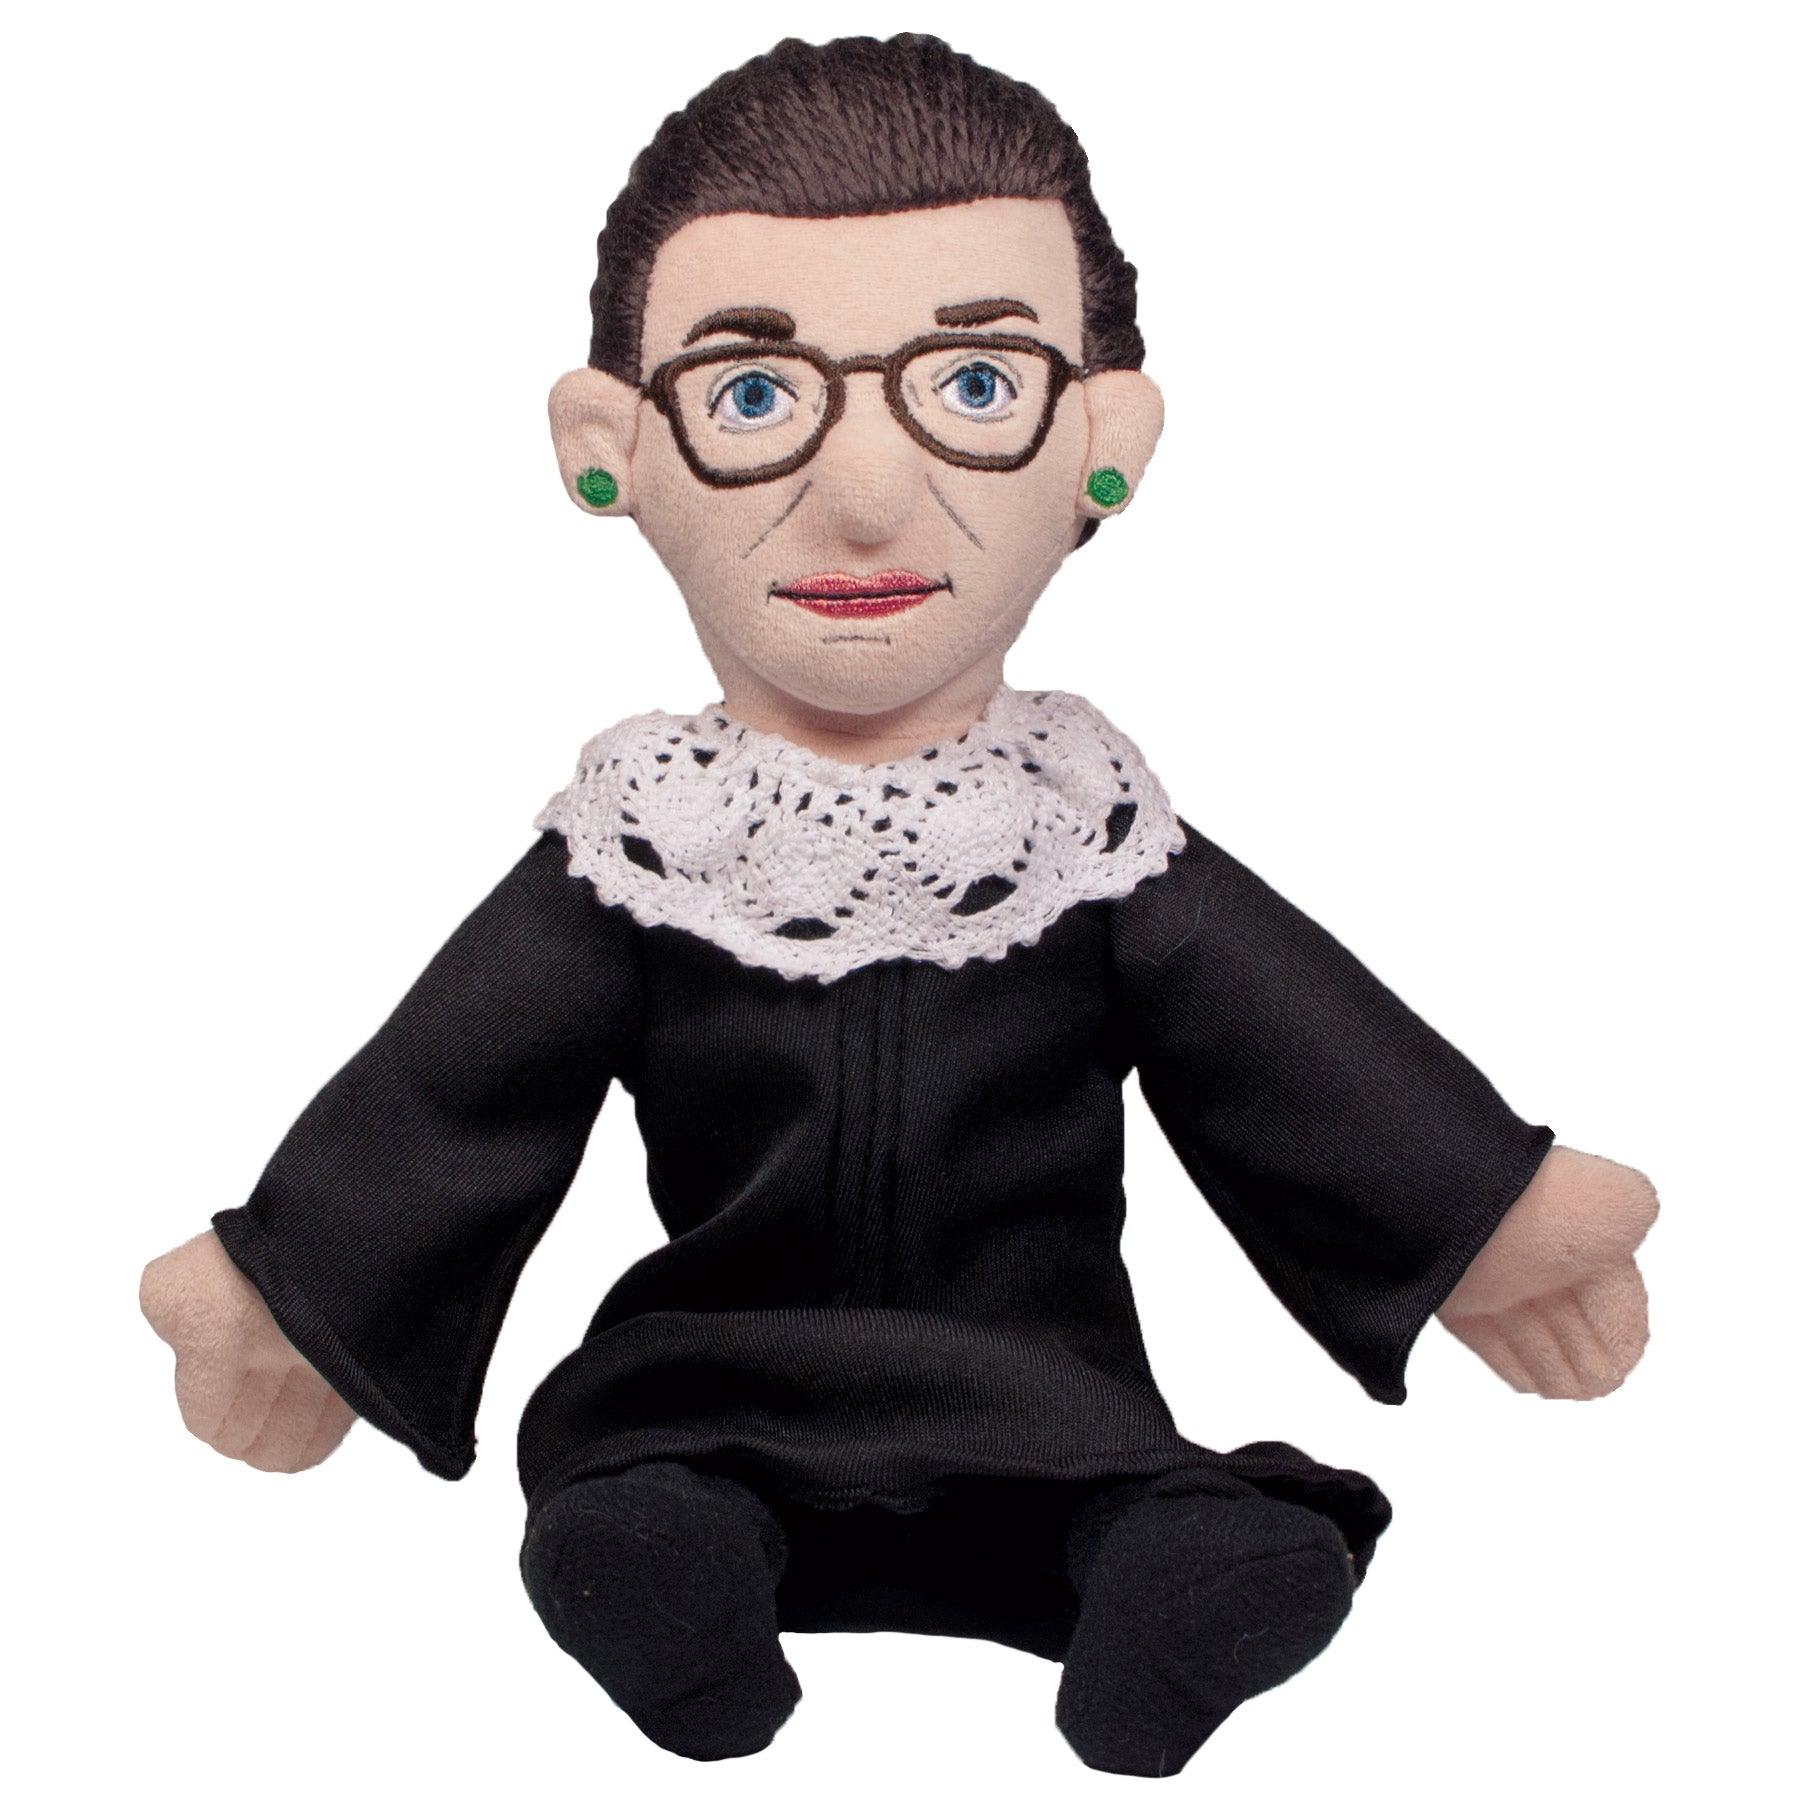 Product photo of Ruth Bader Ginsburg Plush Doll, a novelty gift manufactured by The Unemployed Philosophers Guild.